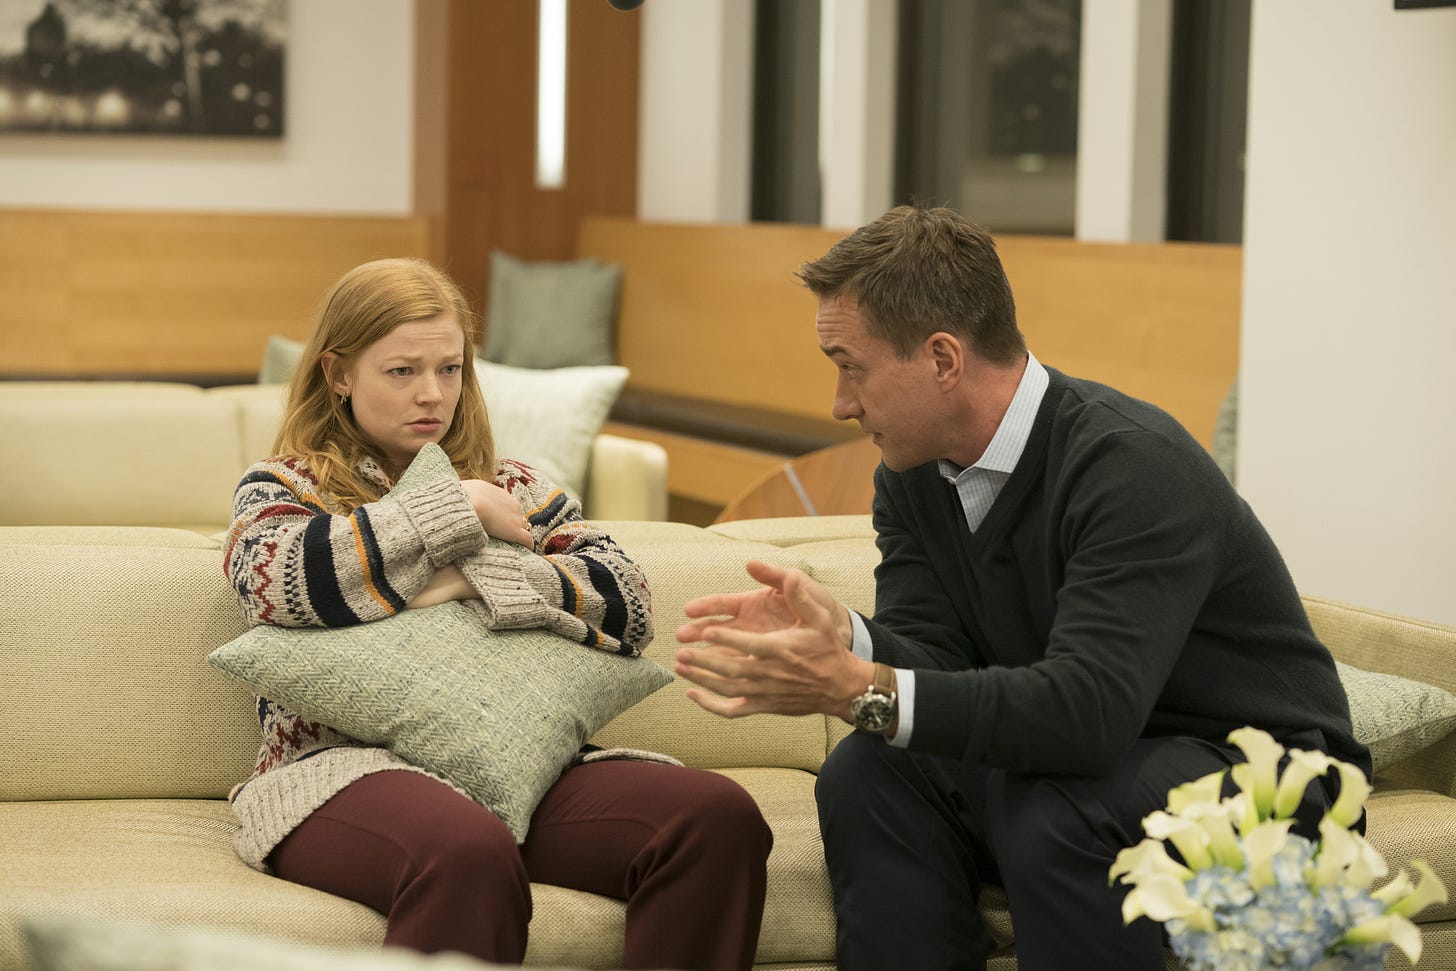 Sarah Snook as Shiv Roy sitting and holding a pillow (left) and Matthew Macfadyen as Tom Wambsgans talking to Shiv and sitting on her left (right) in SUCCESSION.